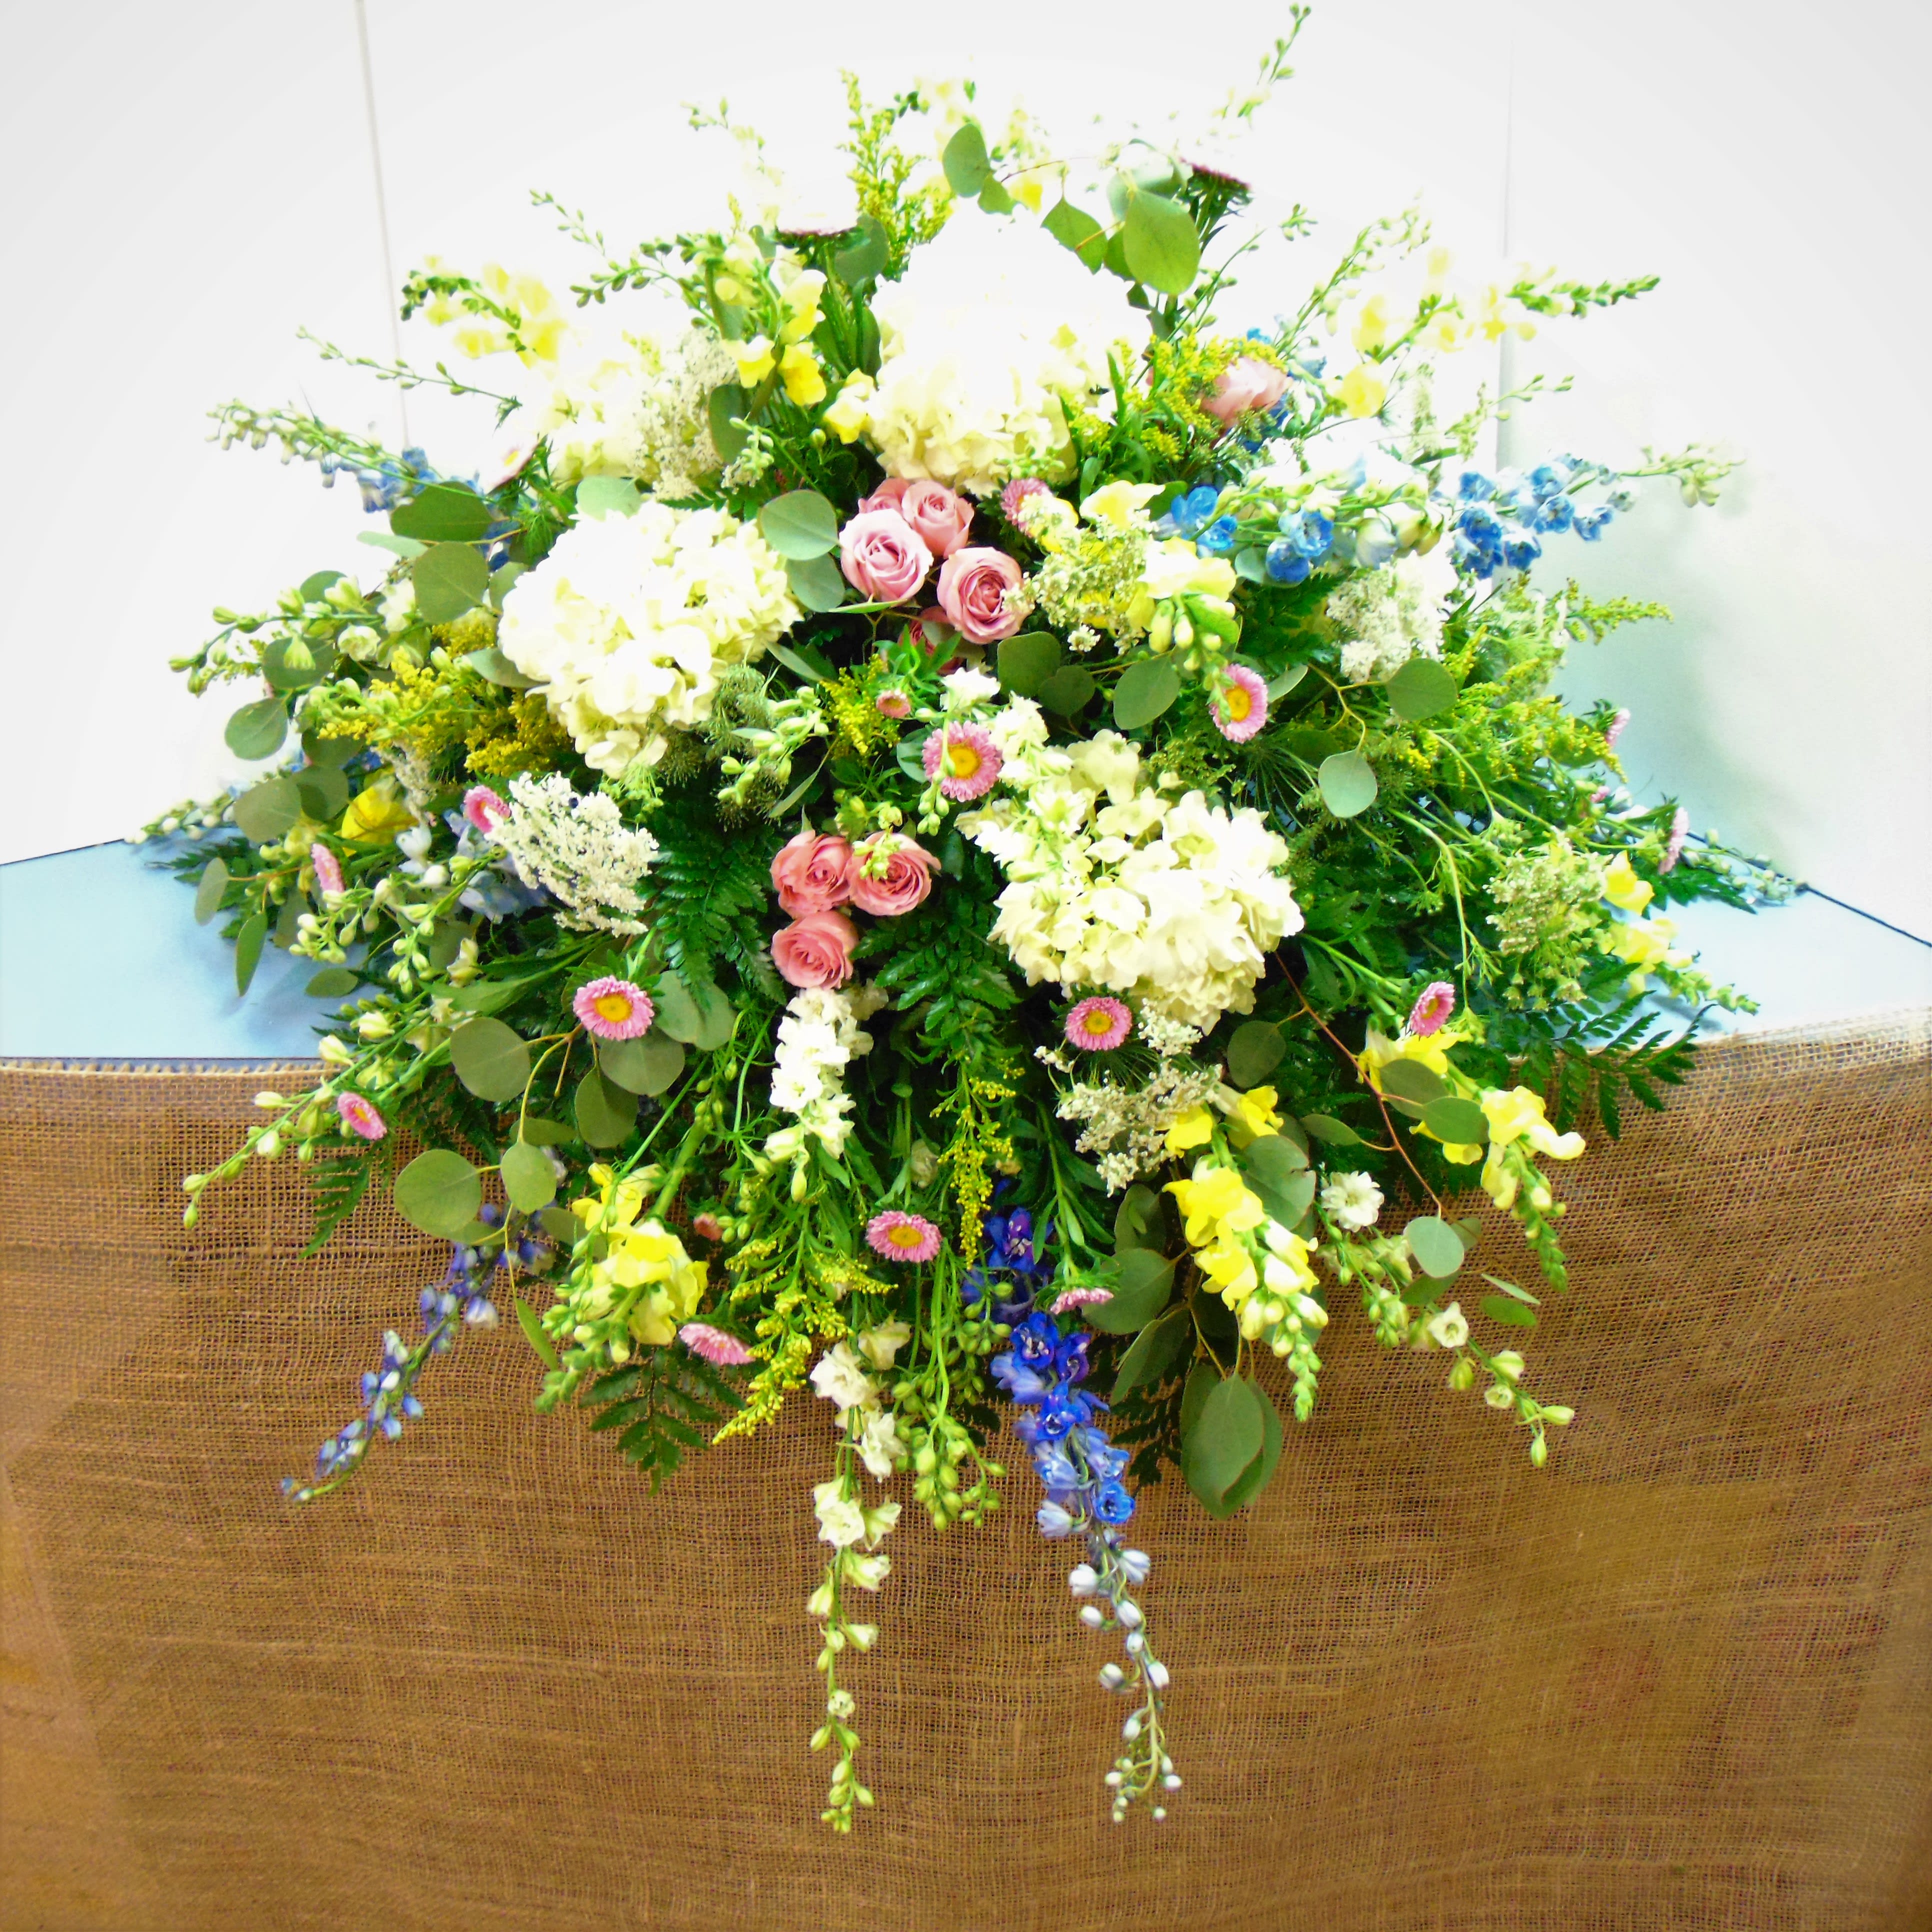 Pastel Perfection Casket Spray - Soft, restful blend of light blue hydrangea, yellow snapdragons, blue delphinium, pink spray roses and garden style accents with greenery. Standard option is pictured. Deluxe option adds more pink spray roses, white and yellow daisies.  The premium option adds 12 stems of yellow and pink spray roses, more blue delphinium and queen anne's lace.